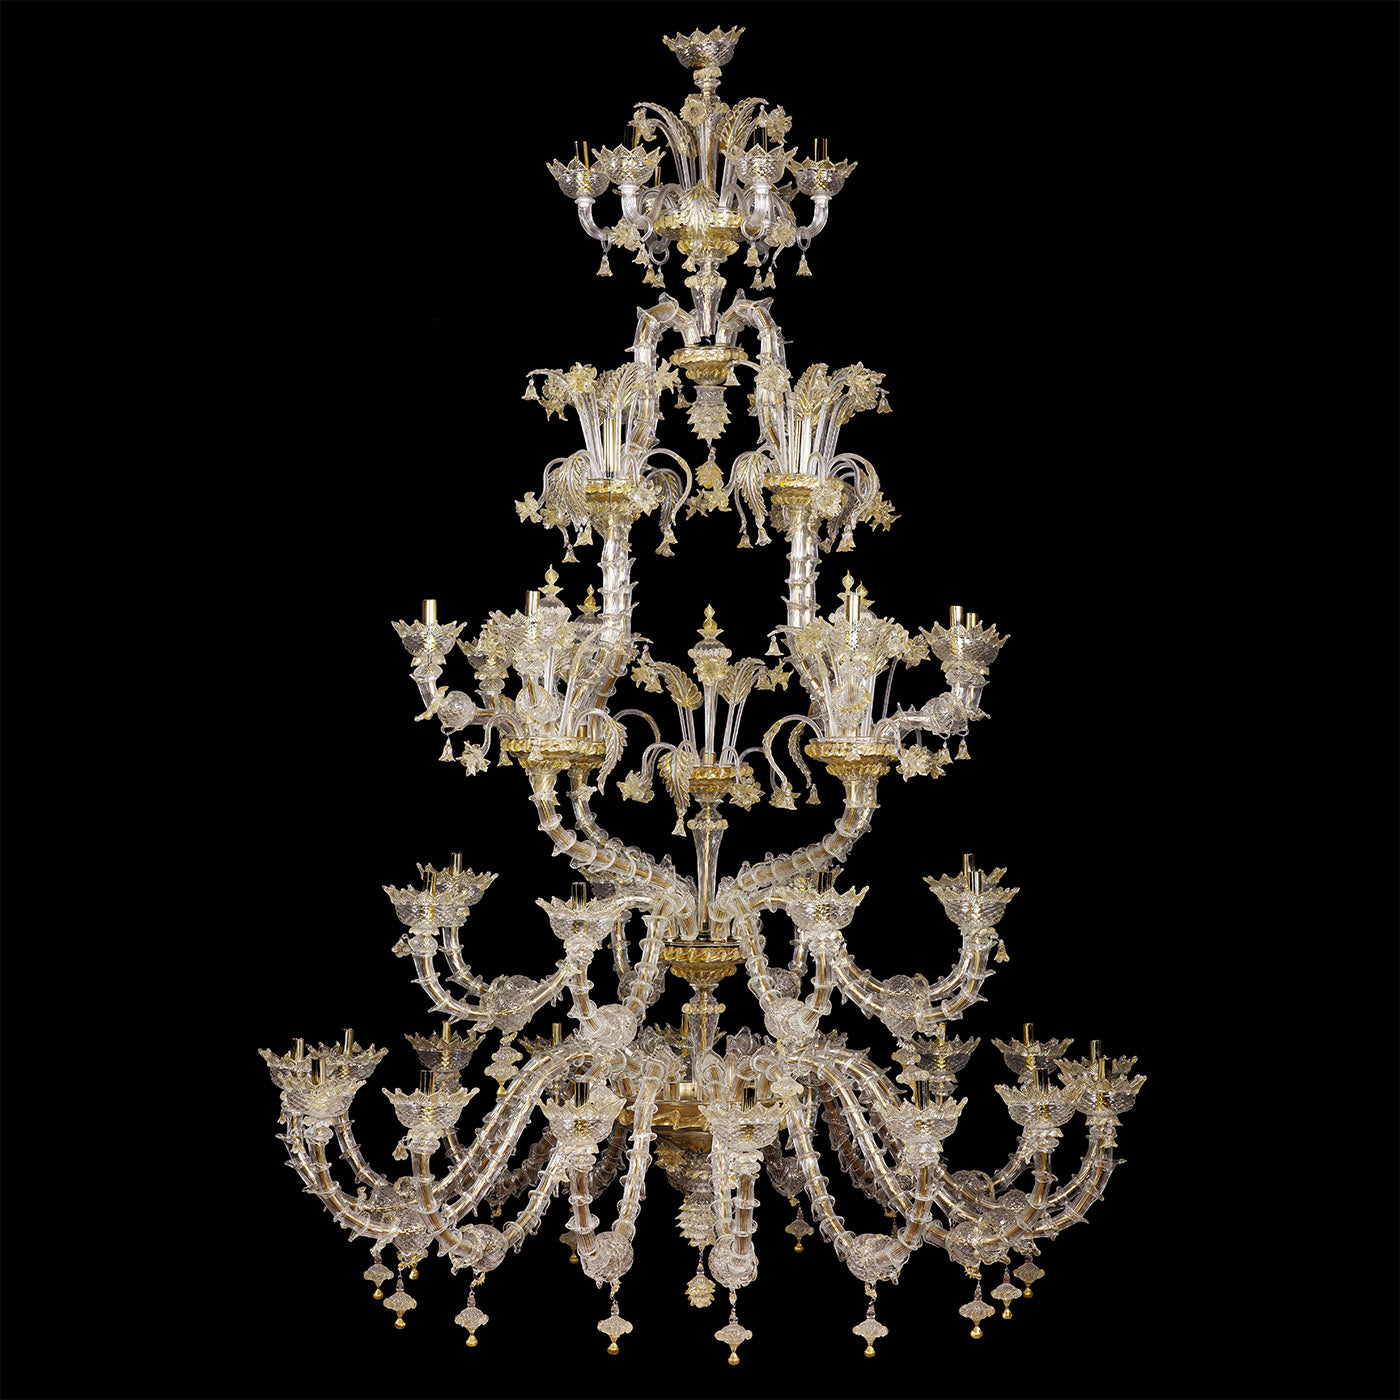 Rezzonico-style Gold and Crystal Chandelier #2 - Alternative view 1